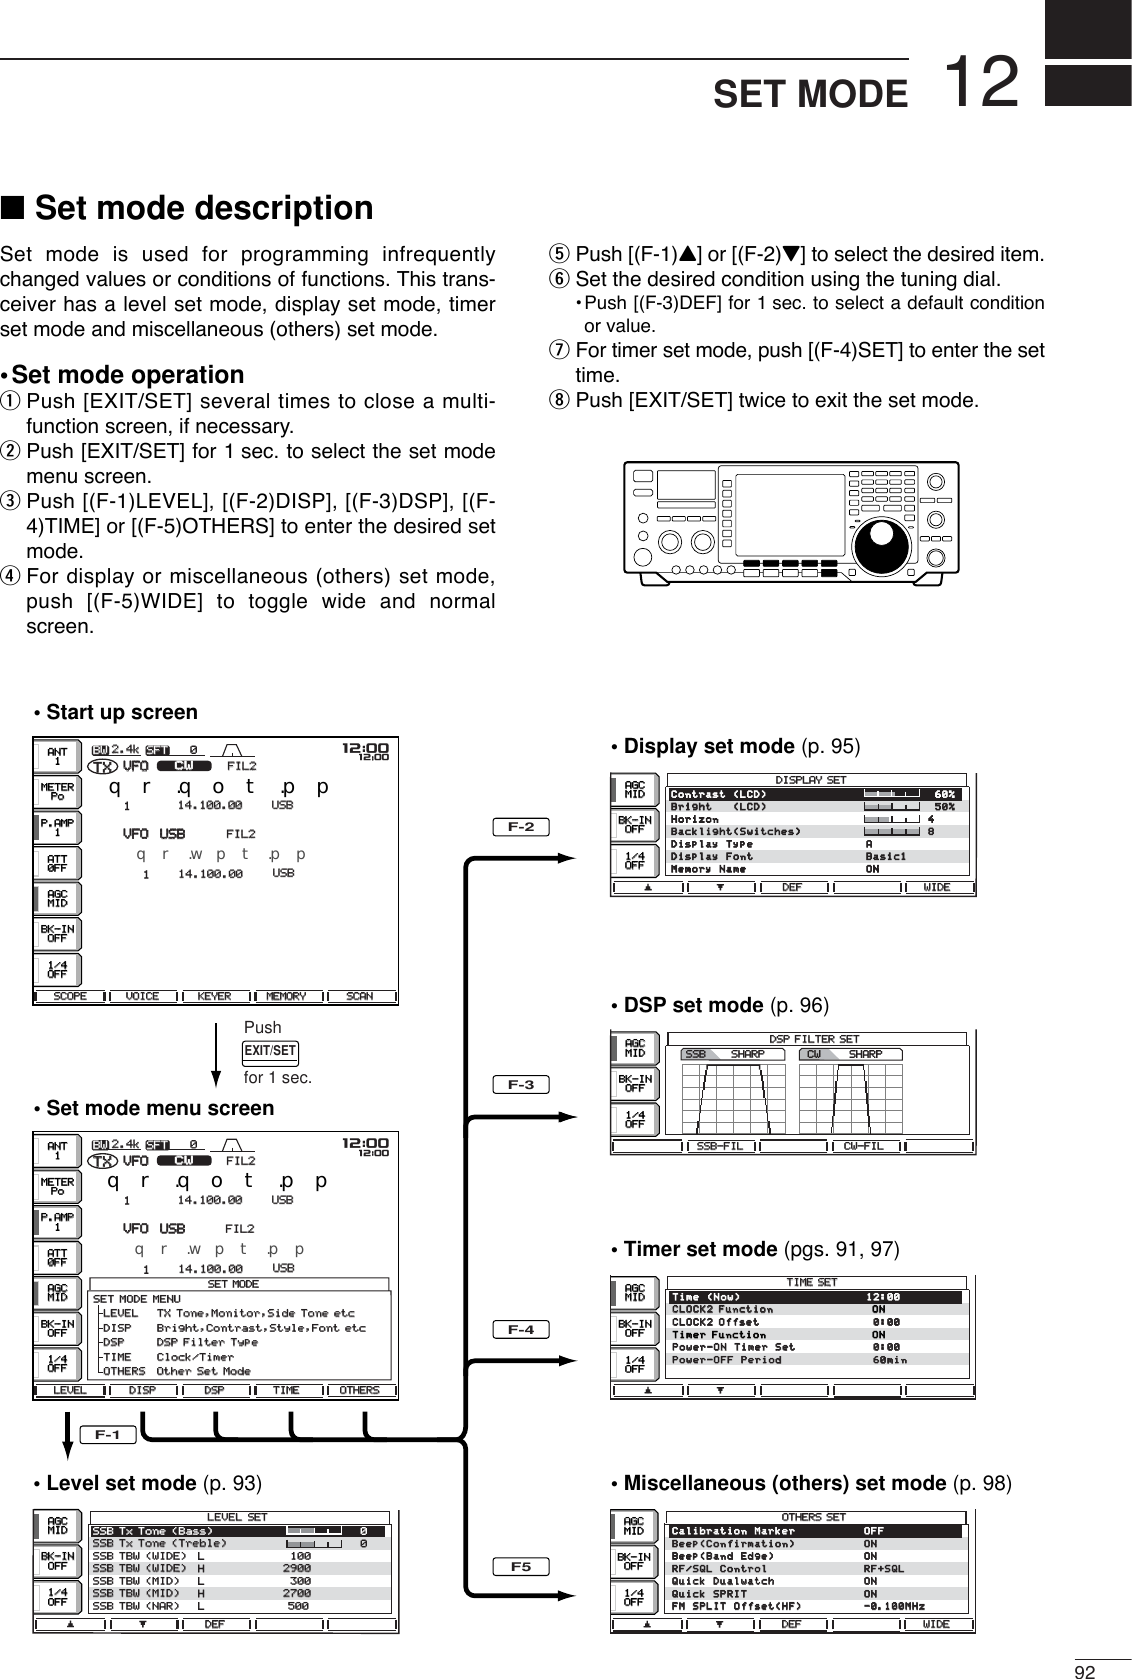 1292SET MODE■Set mode descriptionSet mode is used for programming infrequentlychanged values or conditions of functions. This trans-ceiver has a level set mode, display set mode, timerset mode and miscellaneous (others) set mode.•Set mode operationqPush [EXIT/SET] several times to close a multi-function screen, if necessary.wPush [EXIT/SET] for 1 sec. to select the set modemenu screen.ePush [(F-1)LEVEL], [(F-2)DISP], [(F-3)DSP], [(F-4)TIME] or [(F-5)OTHERS] to enter the desired setmode.rFor display or miscellaneous (others) set mode,push [(F-5)WIDE] to toggle wide and normalscreen.tPush [(F-1)Y] or [(F-2)Z] to select the desired item.ySet the desired condition using the tuning dial.•Push [(F-3)DEF] for 1 sec. to select a default conditionor value.uFor timer set mode, push [(F-4)SET] to enter the settime.iPush [EXIT/SET] twice to exit the set mode.• Display set mode (p. 95)• Level set mode (p. 93)• Start up screen• Set mode menu screen• DSP set mode (p. 96)• Timer set mode (pgs. 91, 97)• Miscellaneous (others) set mode (p. 98)SFTSFT 0FIL2FIL2CWCWTXTXVFOVFO USBUSBUSBUSBUSBUSBFIL2FIL2qr.qot.ppqr.wpt.pp14.100.0014.100.0014.100.0014.100.0011VFOVFOBWBW 2.4k2.4kUSBUSB14.100.0014.100.001SET MODESET MODELEVEL LEVEL SETSETSSB Tx Tone (Bass)SSB Tx Tone (Bass) 0SSB Tx Tone (Treble)SSB Tx Tone (Treble) 0SSB TBW (WIDE)SSB TBW (WIDE) L100100SSB TBW (WIDE)SSB TBW (WIDE) H29002900SSB TBW (MID)SSB TBW (MID) L300300SSB TBW (MID)SSB TBW (MID) H27002700SSB TBW (NAR)SSB TBW (NAR) L500500OTHERS OTHERS SETSETTIME TIME SETSETDISPLAY DISPLAY SETSETSCOPESCOPE VOICEVOICE KEYERKEYER MEMORYMEMORY SCANSCANLEVELLEVEL DISPDISP DSPDSP TIMETIME OTHERSOTHERSéèDEFDEF éèDEFDEF WIDEWIDEéèDEFDEF WIDEWIDESSB-FILSSB-FIL CW-FILCW-FILéèDSP FILTER SETDSP FILTER SETSHARPSHARPSSBSSBSHARPCWMETERMETERPoPoP.AMPP.AMP1ATTATT0FF0FFBK-INBK-INOFFOFF1/41/4OFFOFFAGCAGCMIDMIDANTANT1EXIT/SETPushfor 1 sec.SFTSFT 0FIL2FIL2CWCWTXTXVFOVFO USBUSBUSBUSBFIL2FIL2qr.qot.ppqr.wpt.pp14.100.0014.100.001VFOVFOBWBW 2.4k2.4kMETERMETERPoPoP.AMPP.AMP1ATTATT0FF0FFBK-INBK-INOFFOFF1/41/4OFFOFFAGCAGCMIDMIDANTANT1BK-INBK-INOFFOFF1/41/4OFFOFFAGCAGCMIDMIDBK-INBK-INOFFOFF1/41/4OFFOFFAGCAGCMIDMIDBK-INBK-INOFFOFF1/41/4OFFOFFAGCAGCMIDMIDBK-INBK-INOFFOFF1/41/4OFFOFFAGCAGCMIDMIDBK-INBK-INOFFOFF1/41/4OFFOFFAGCAGCMIDMIDF-1F-2F-3F-4F5qw:ppqw:ppqw:ppqw:ppSET MODE MENUSET MODE MENU  LEVEL     LEVEL    TX Tone,Monitor,Side Tone etcTX Tone,Monitor,Side Tone etc  DISP     Bright,Contrast,Style,Font etc  DISP     Bright,Contrast,Style,Font etc  DSP  DSP DSP Filter TypeDSP Filter Type  TIME     Clock/Timer  TIME     Clock/Timer  OTHERS   OTHERS  Other Set ModeOther Set ModeCalibrationCalibrationMarkerMarker OFFOFFBeep(Confirmation)Beep(Confirmation) ONONBeep(BandBeep(BandEdge)Edge) ONONRF/SQLRF/SQLControlControl RF+SQLRF+SQLQuickQuickDualwatchDualwatch ONONQuickQuickSPRITSPRIT ONONFMFMSPLITSPLITOffset(HF)Offset(HF) -0.100MHz-0.100MHzTimeTime(Now)(Now) 12:0012:00CLOCK2 FunctionCLOCK2 Function  ONONCLOCK2 OffsetCLOCK2 Offset 0:000:00Timer FunctionTimer Function  ONONPower-ONPower-ONTimerTimerSetSet 0:000:00Power-OFFPower-OFFPeriodPeriod 60min60minContrast(LCD) 60%Bright(LCD) 50%Horizon 4Backlight(Switches) 8DisplayType ADisplayFont Basic1MemoryName ON